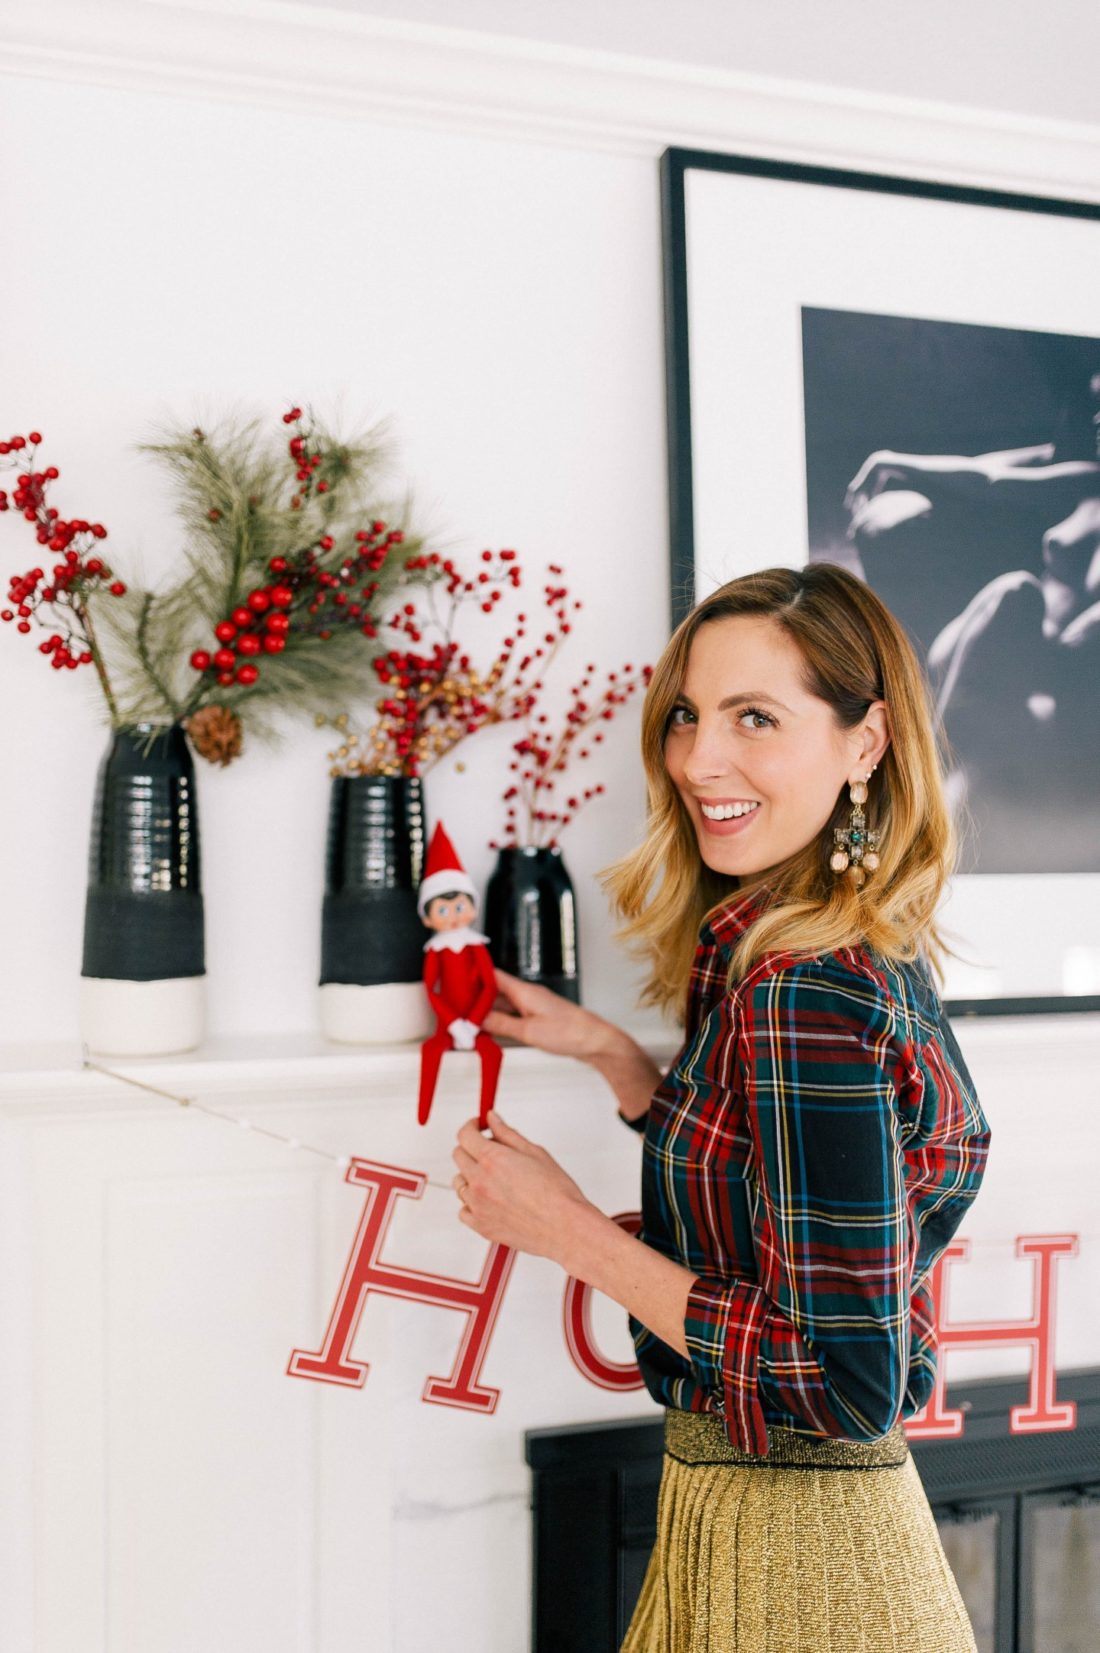 Eva Amurri Martino wears a plaid shirt and puts the Elf On The Shelf on the mantel in her kitchen